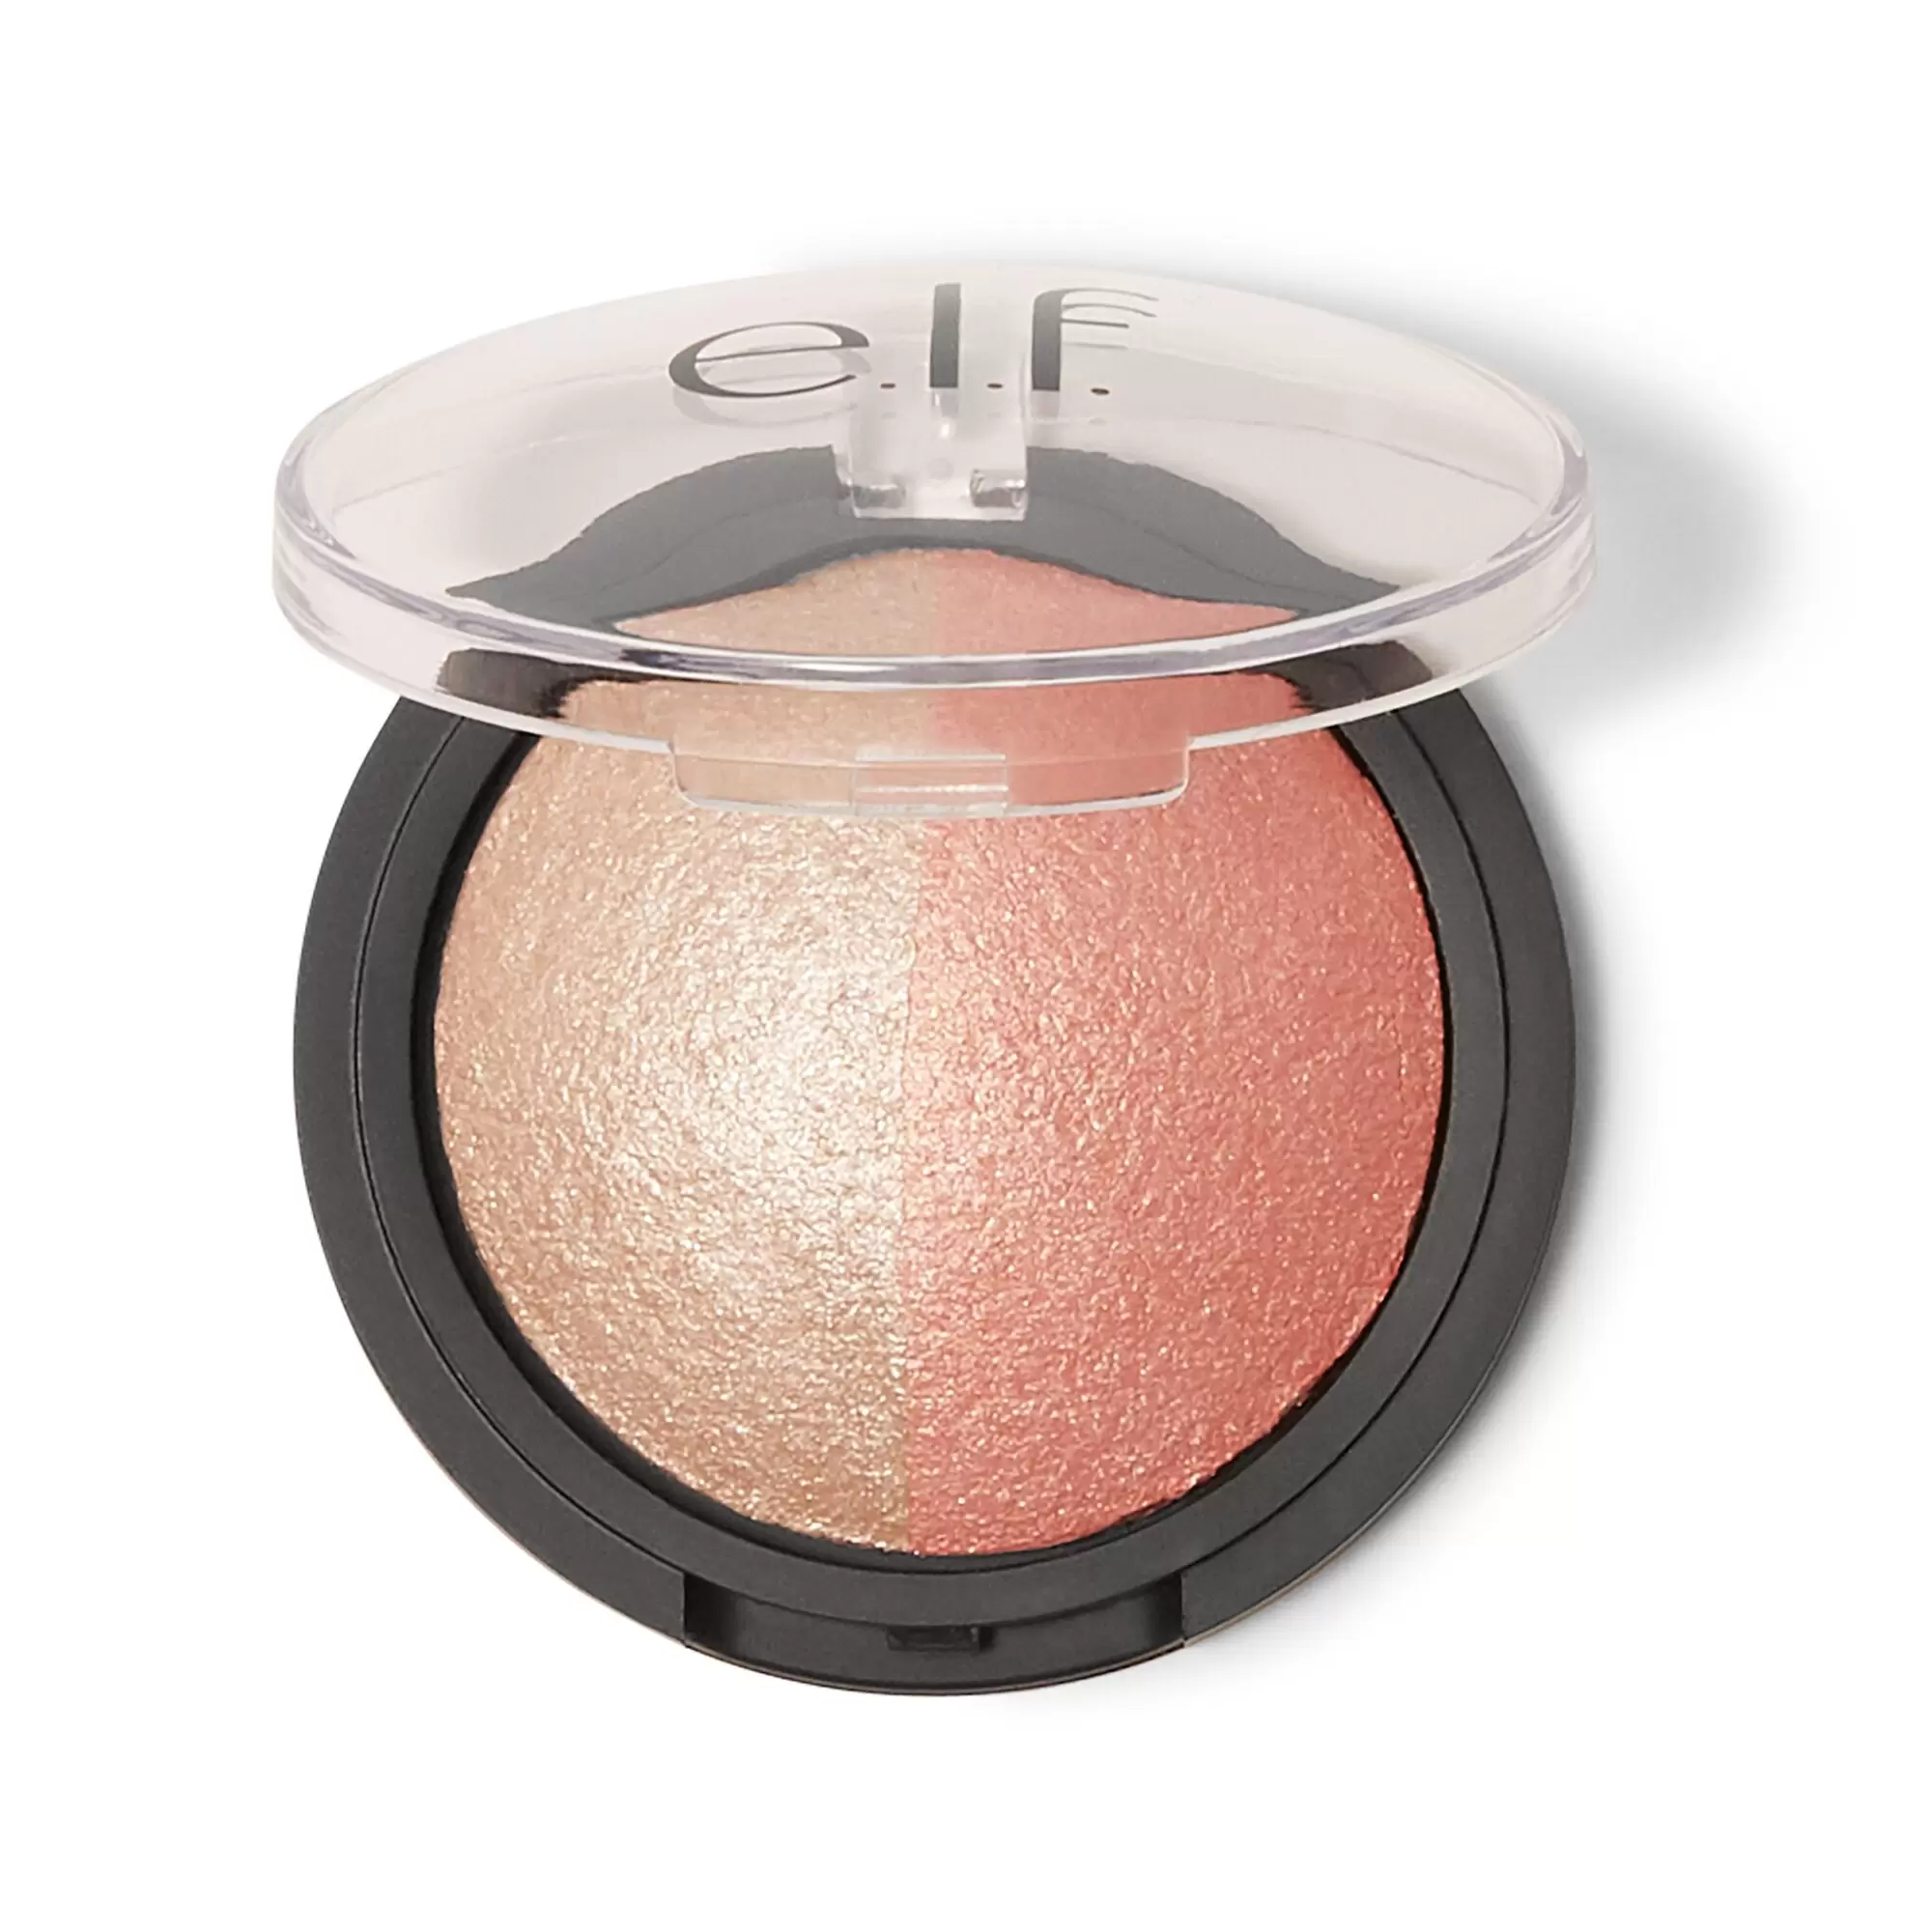 Elf Cosmetics Baked Highlighter & Blush 83371 Rose Gold, 0.6 Ounce